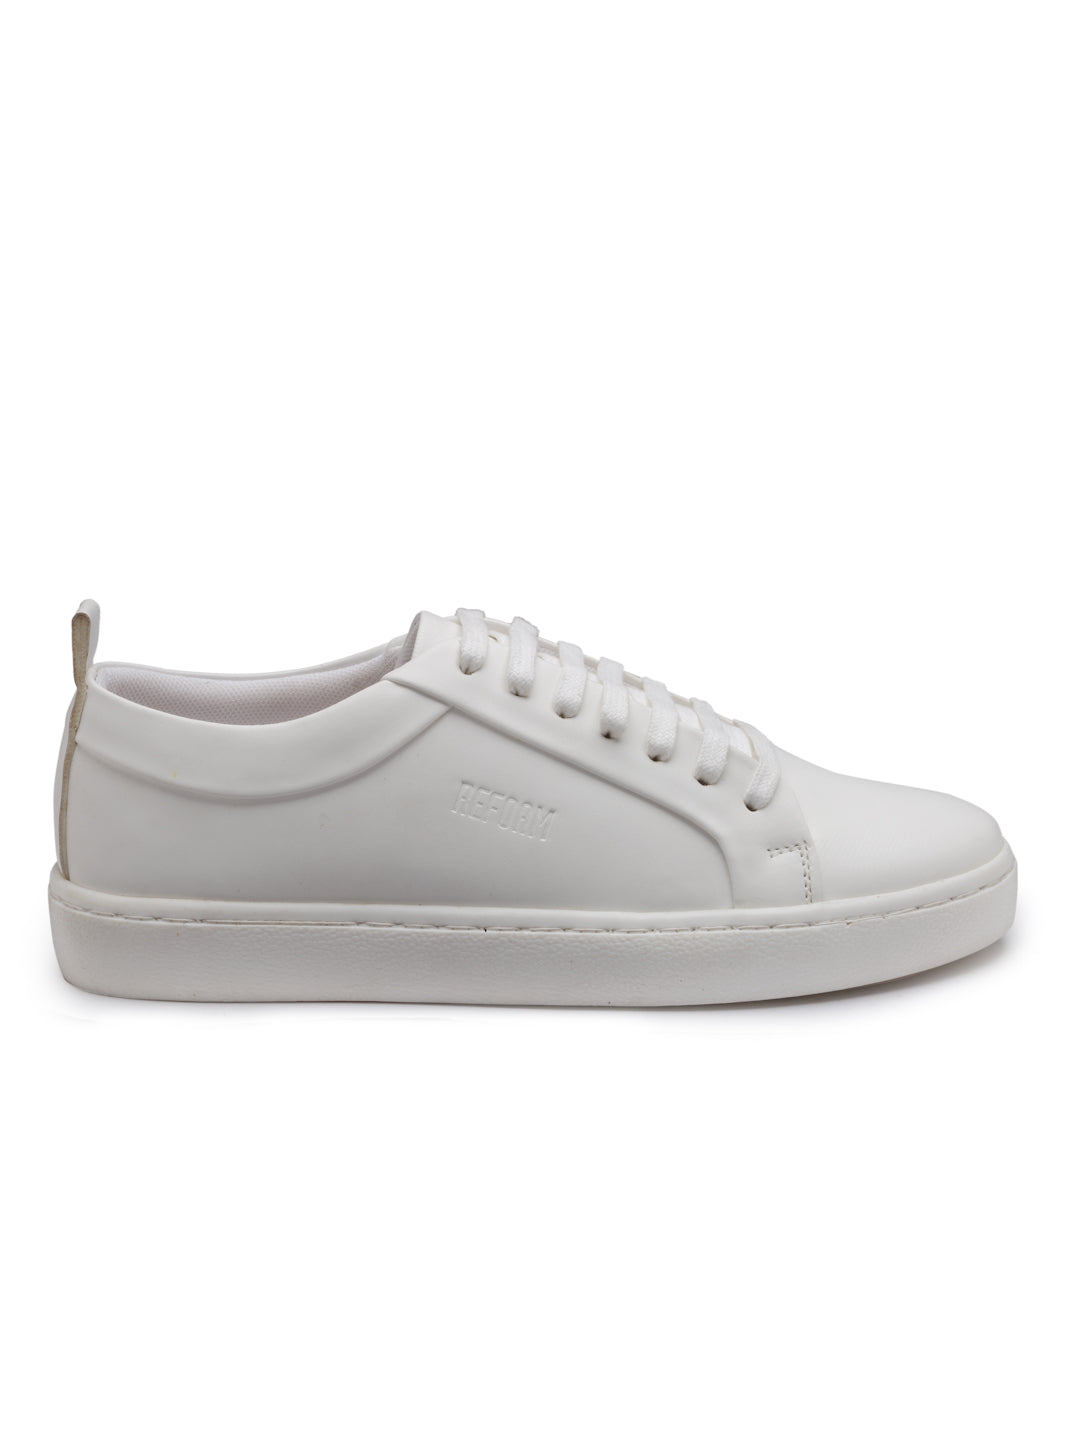 Women's White Synthetic Leather Lace up Casual Sneaker